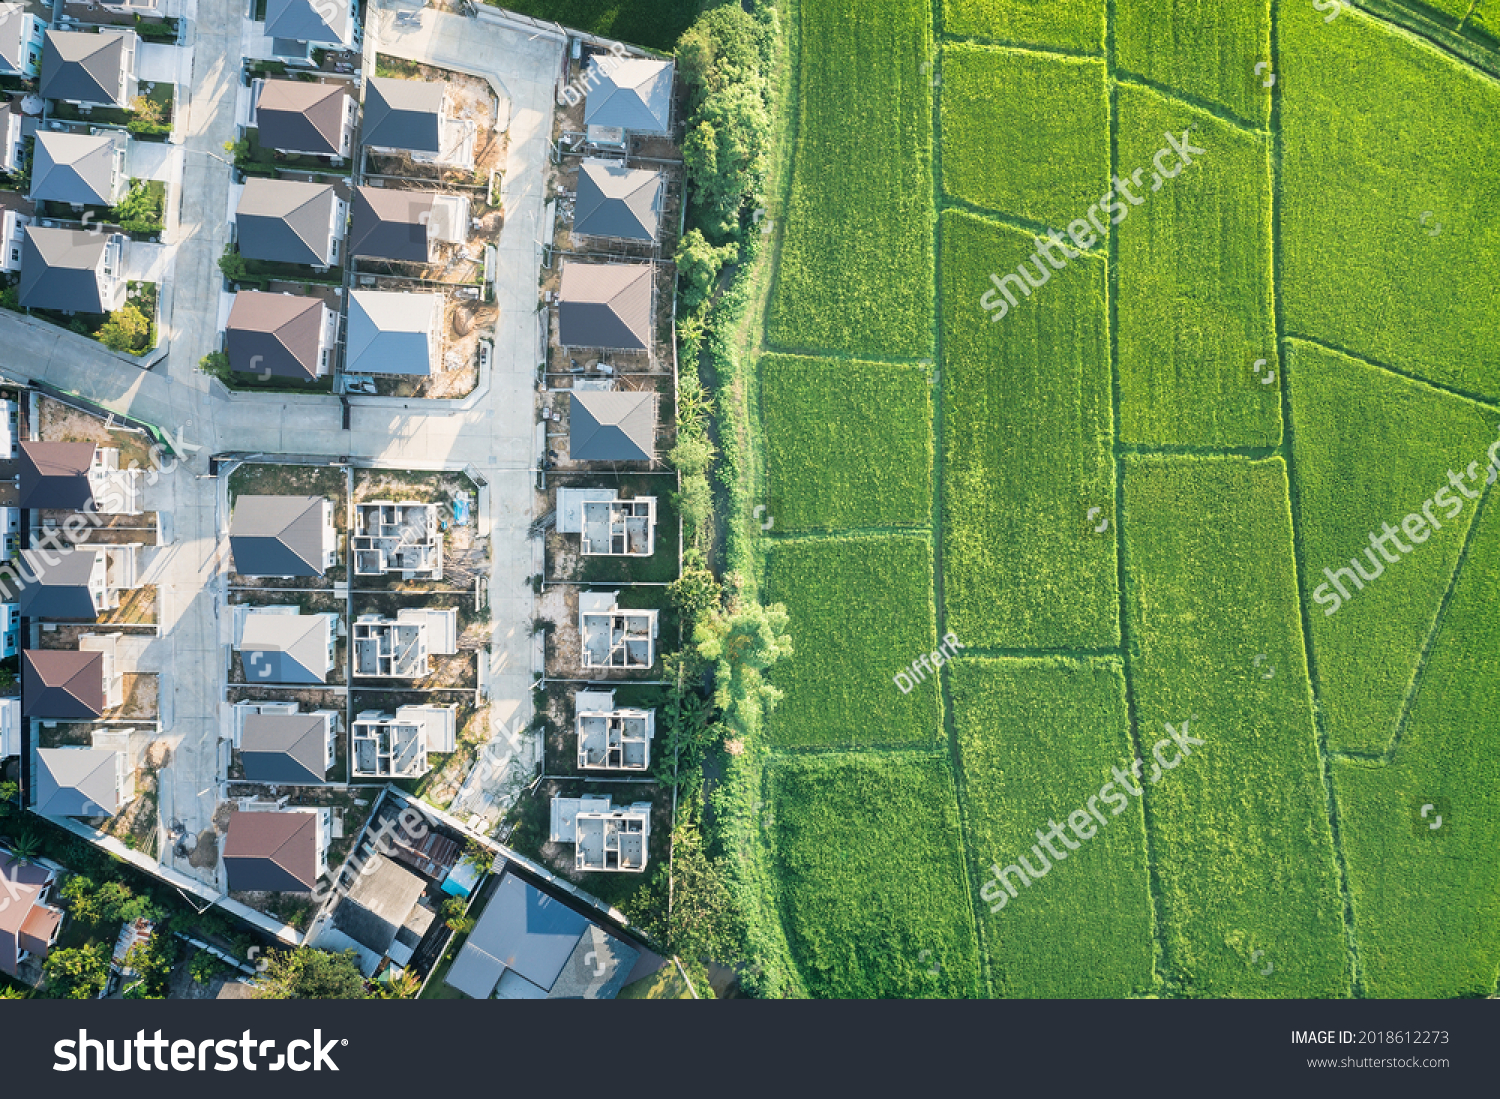 Land or landscape of green field in aerial view. Include agriculture farm, house building, village. That real estate or property. Plot of land for housing subdivision, development, sale or investment. #2018612273